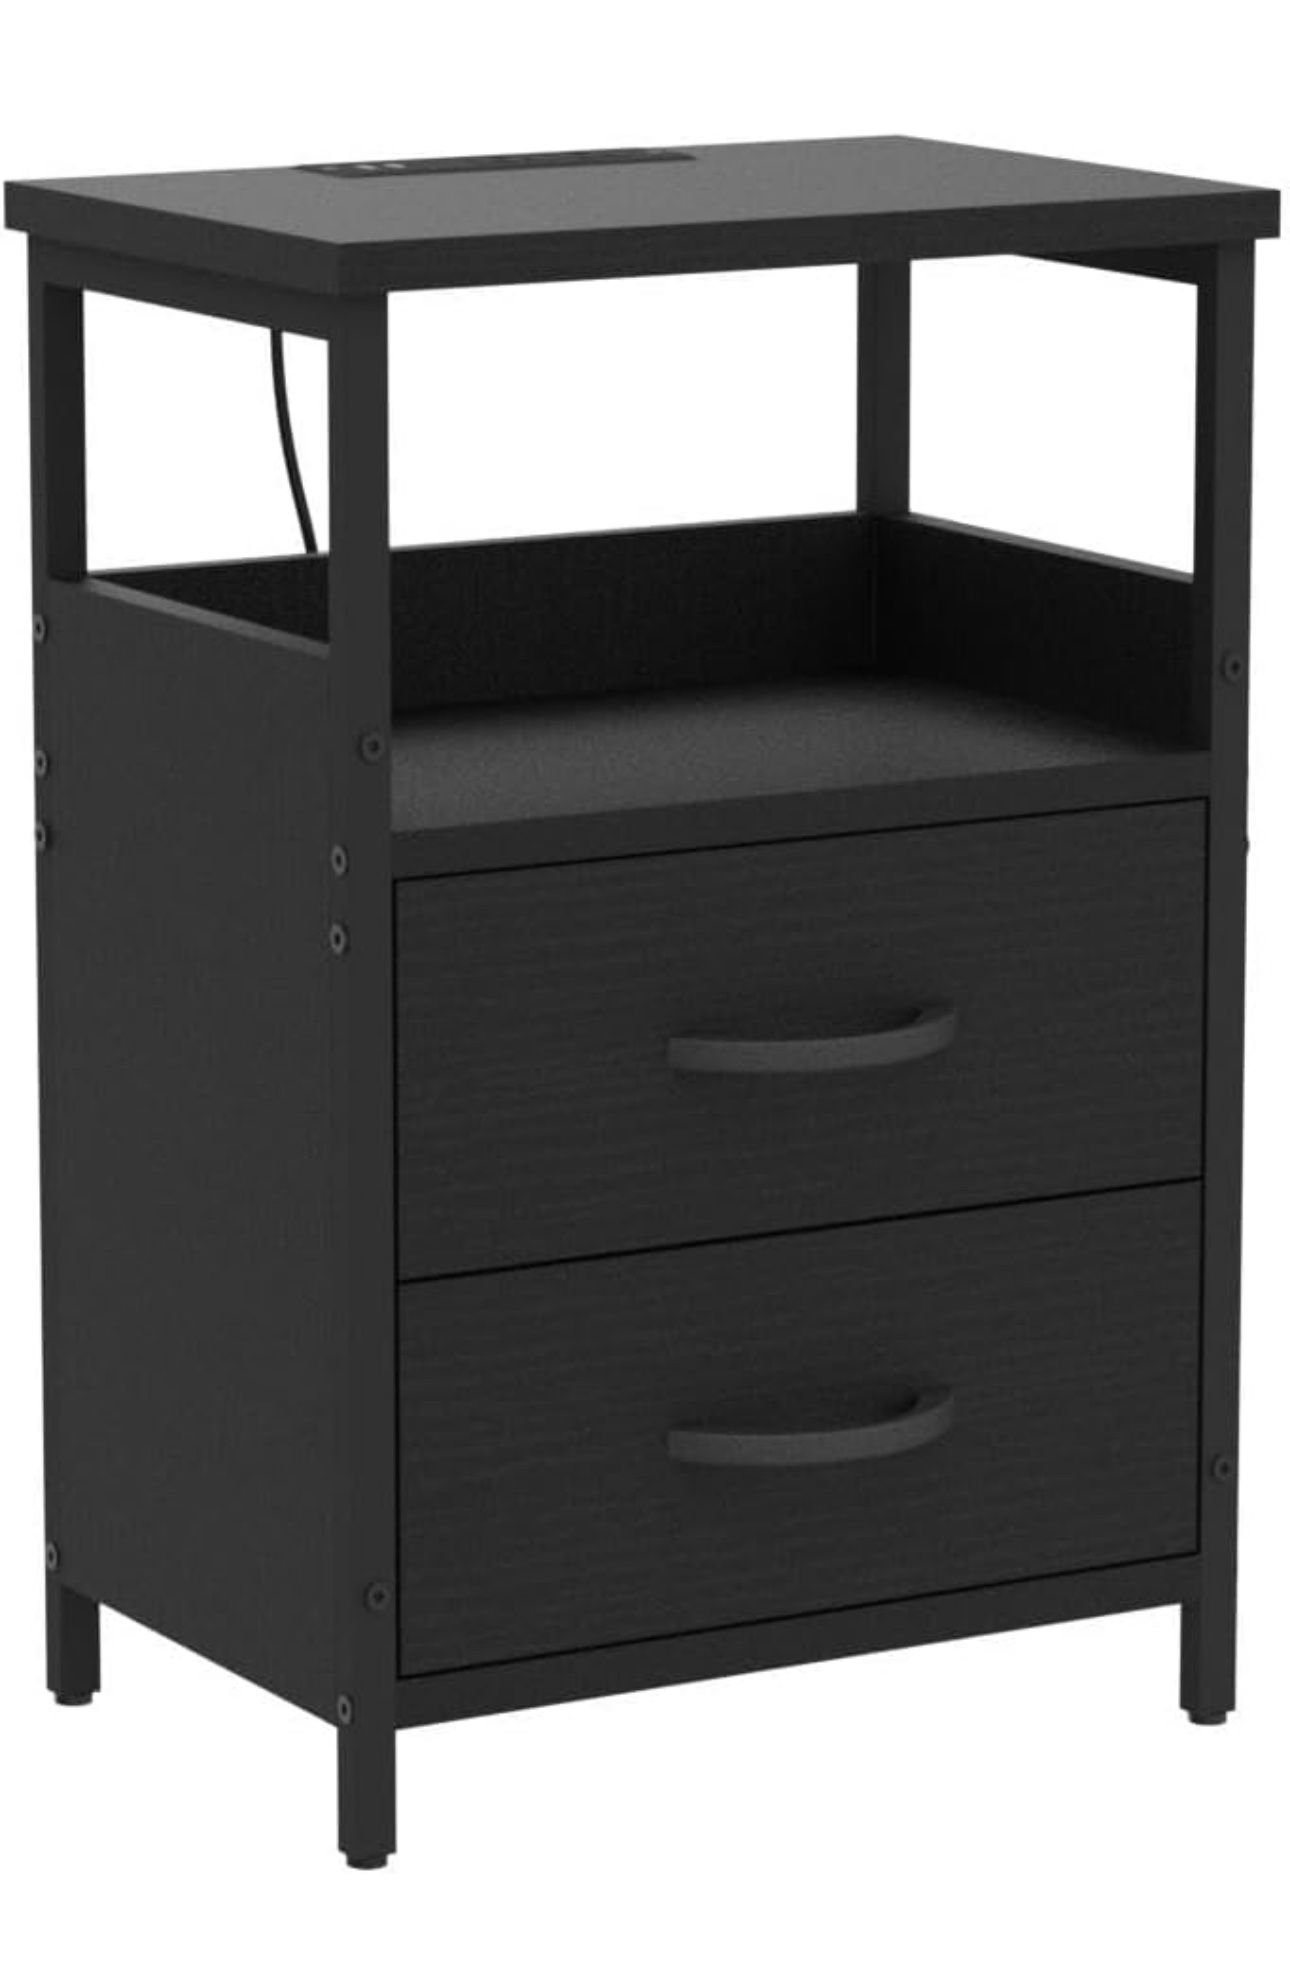 Brand New Drawer Dresser for Bedroom with Charging Station, Drawers Dresser with Steel Frame and Wood Top, Fabric Chest of Drawers Storage Organizer f